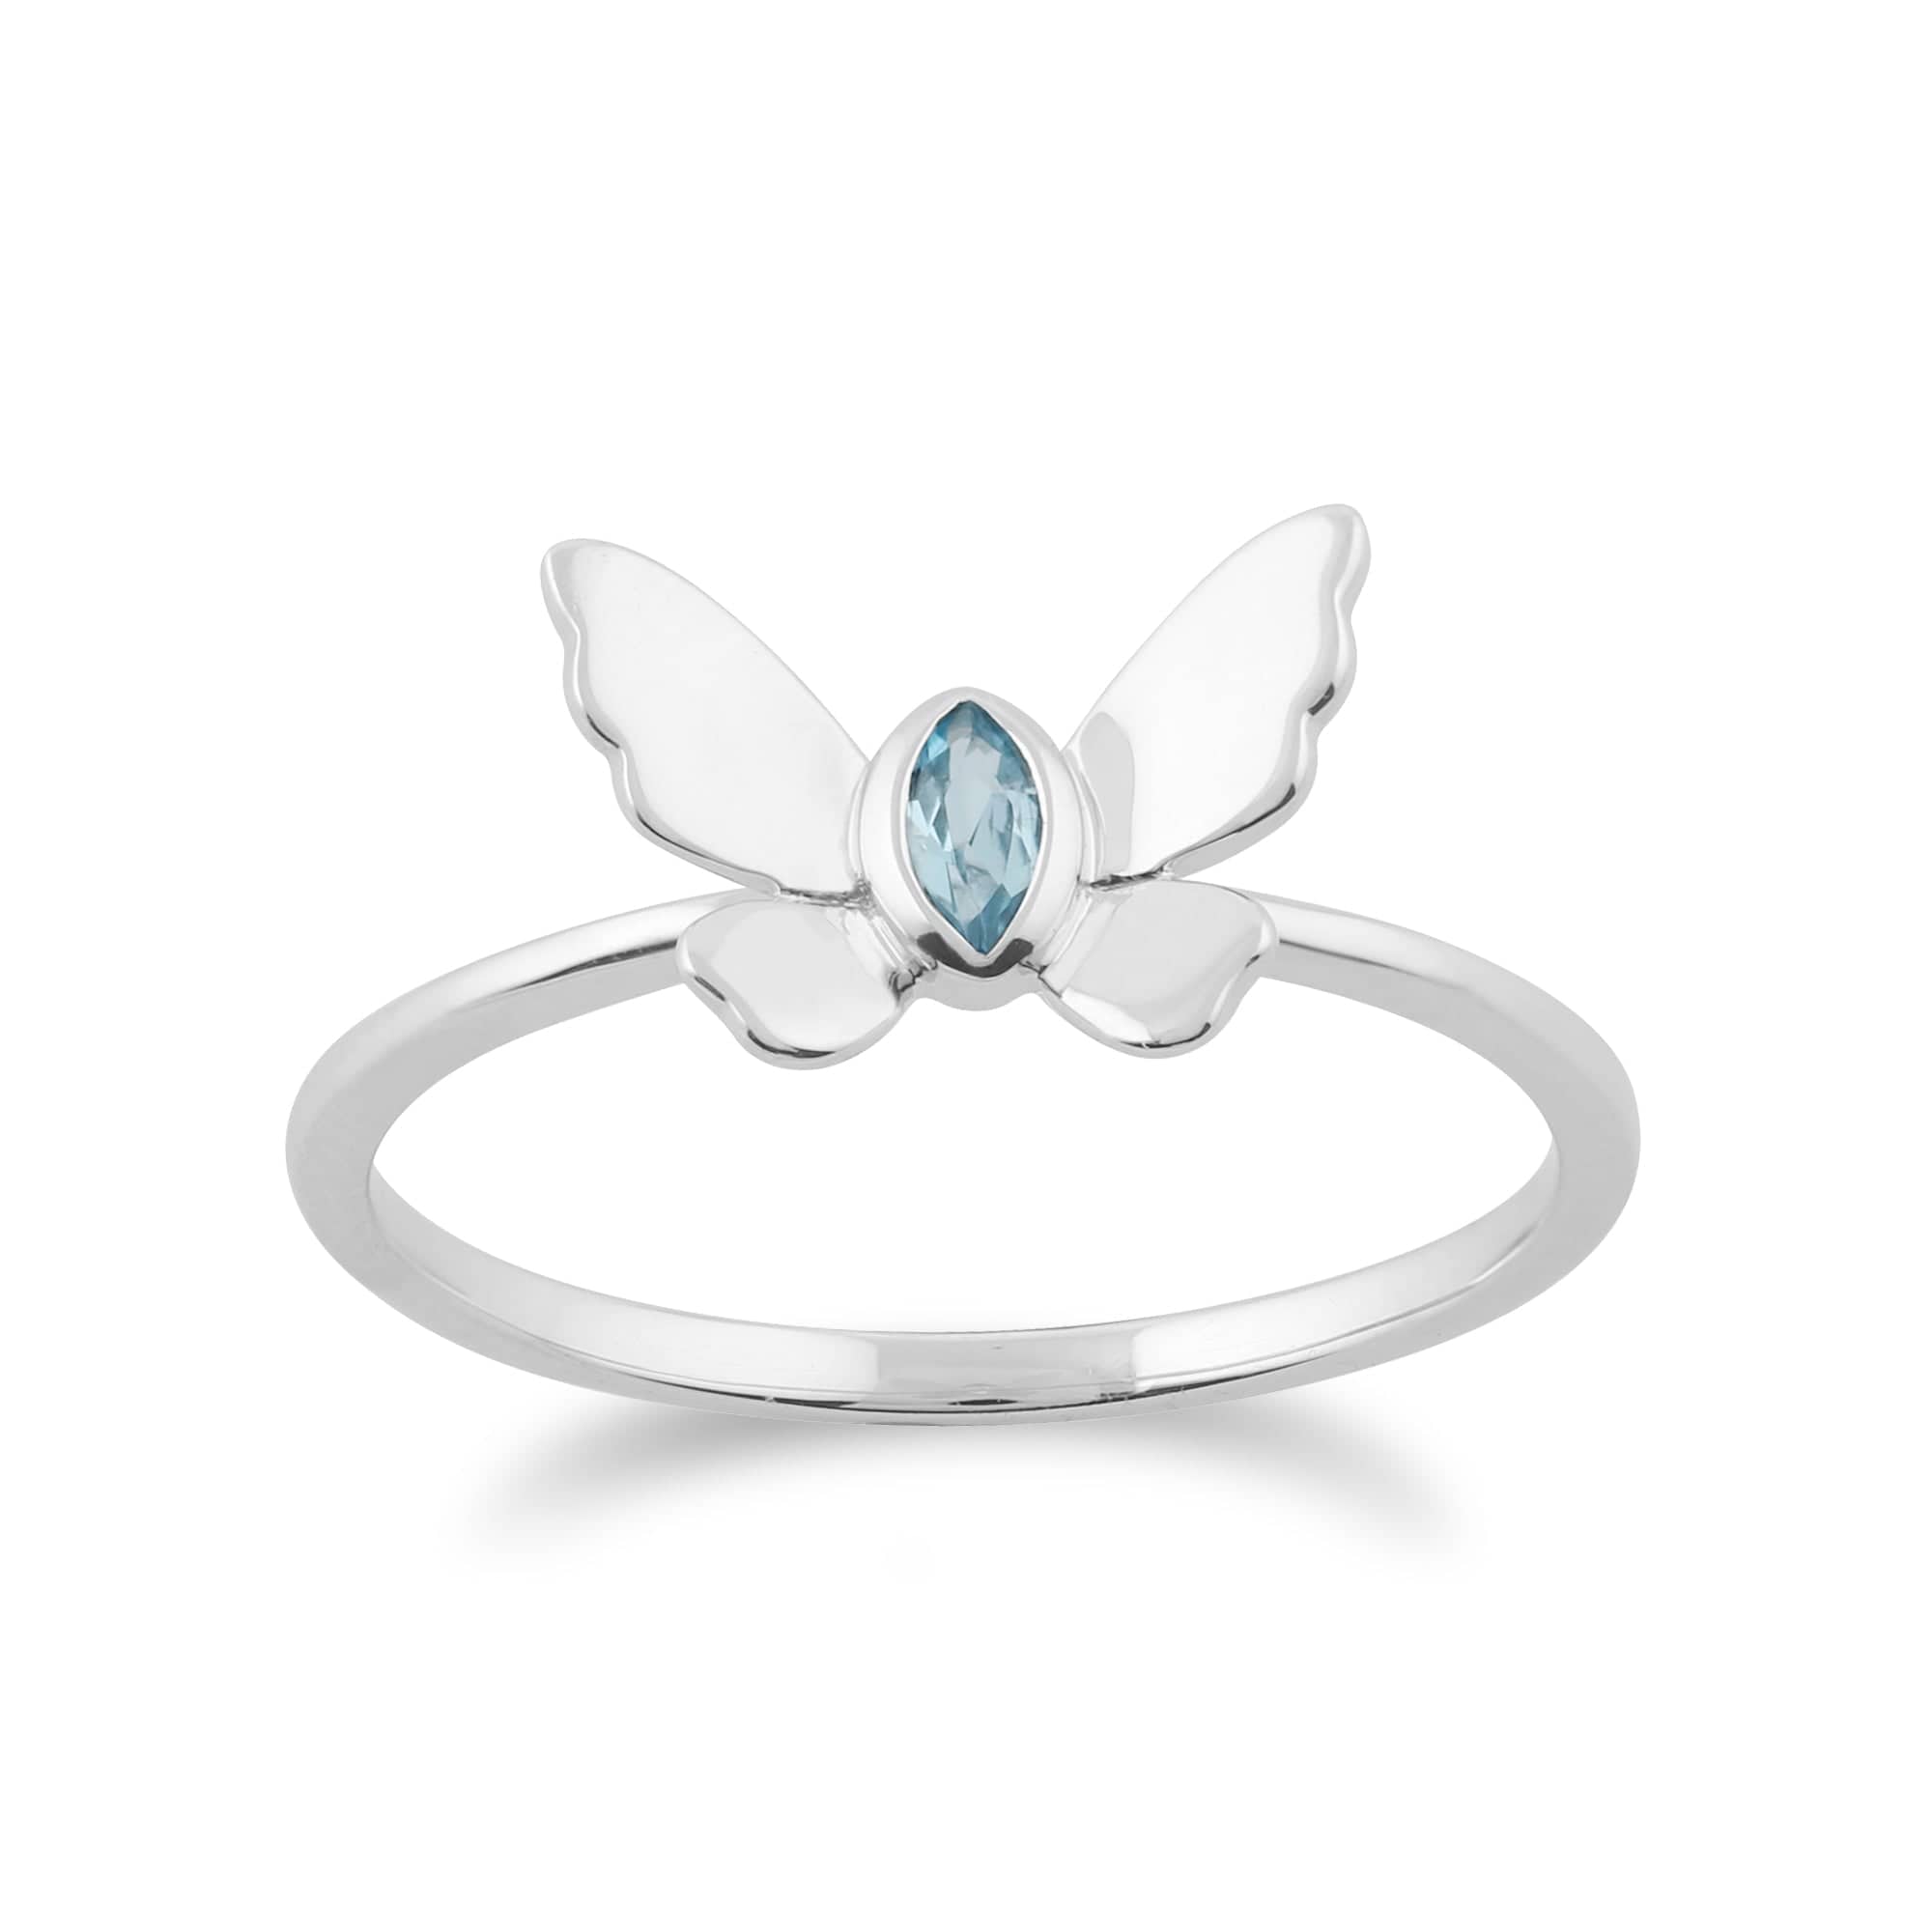 Gemondo 9ct White Gold 0.08ct Blue Topaz Butterfly Ring Image 1